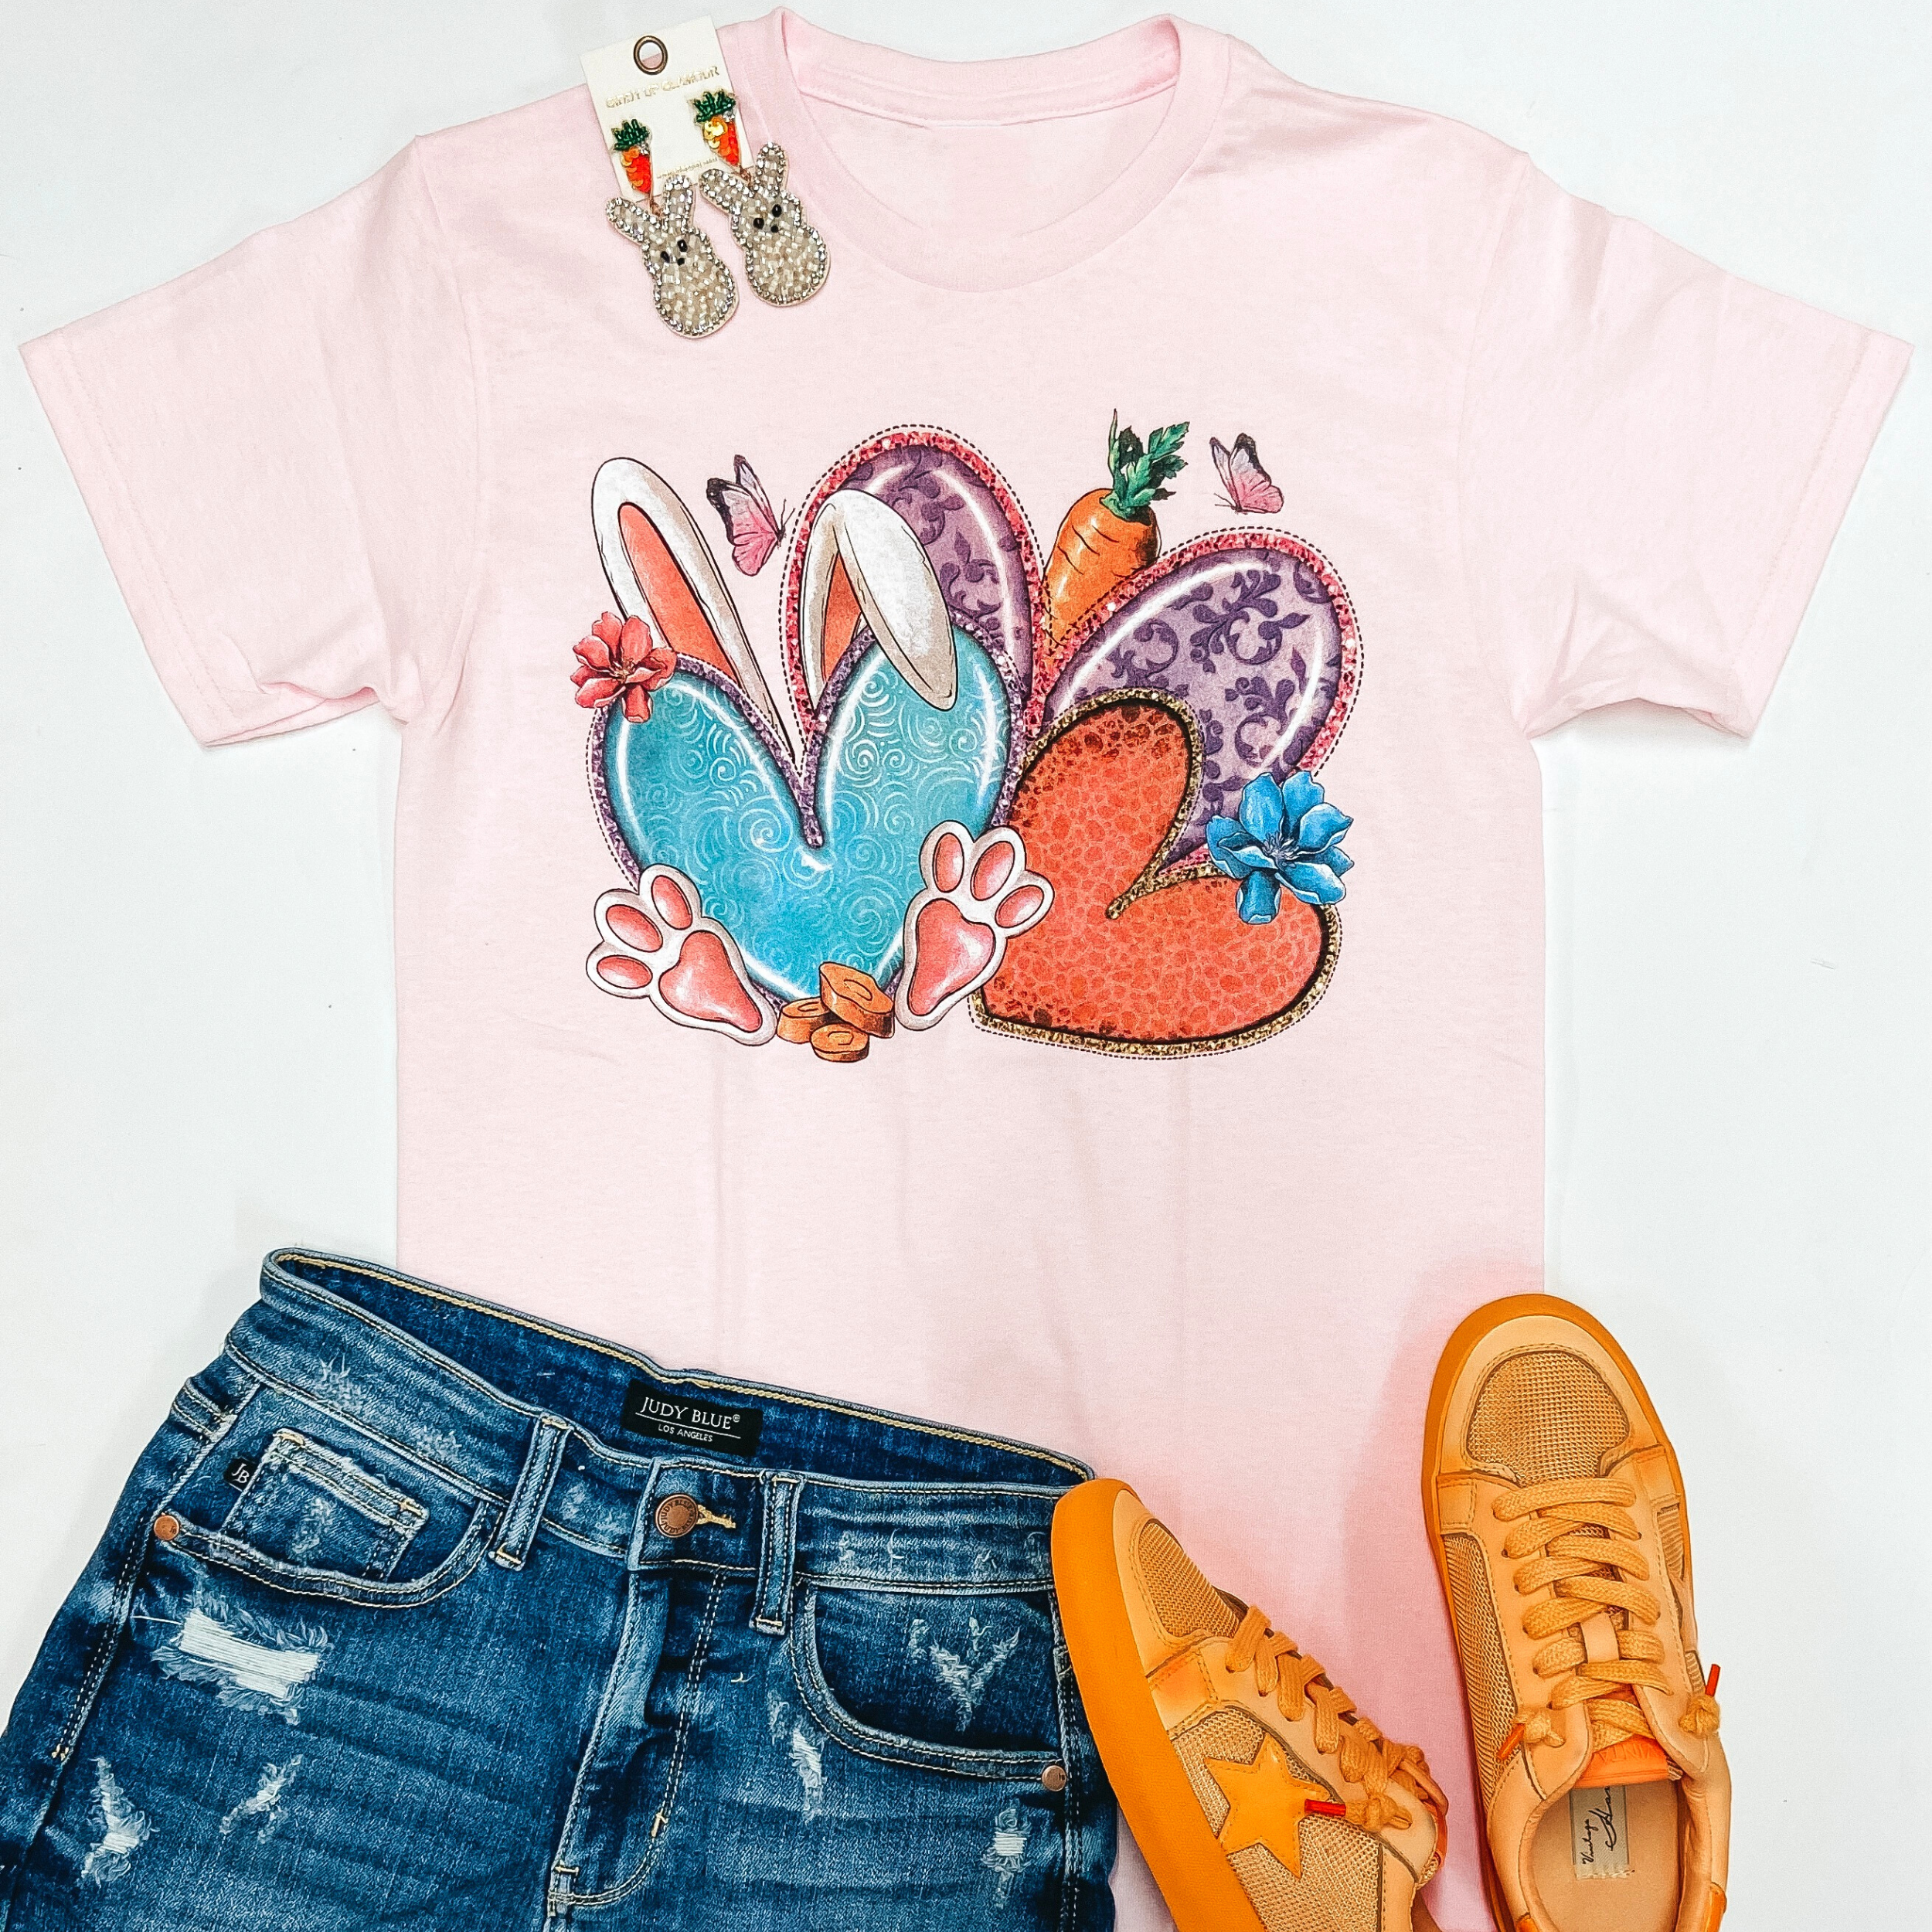 A light pink tee shirt with short sleeves and a graphic of colorful hearts, butterflies, carrots, bunny ears and feet. This tee is pictured on a white background with orange sneakers, peep shaped earrings, and denim shorts.